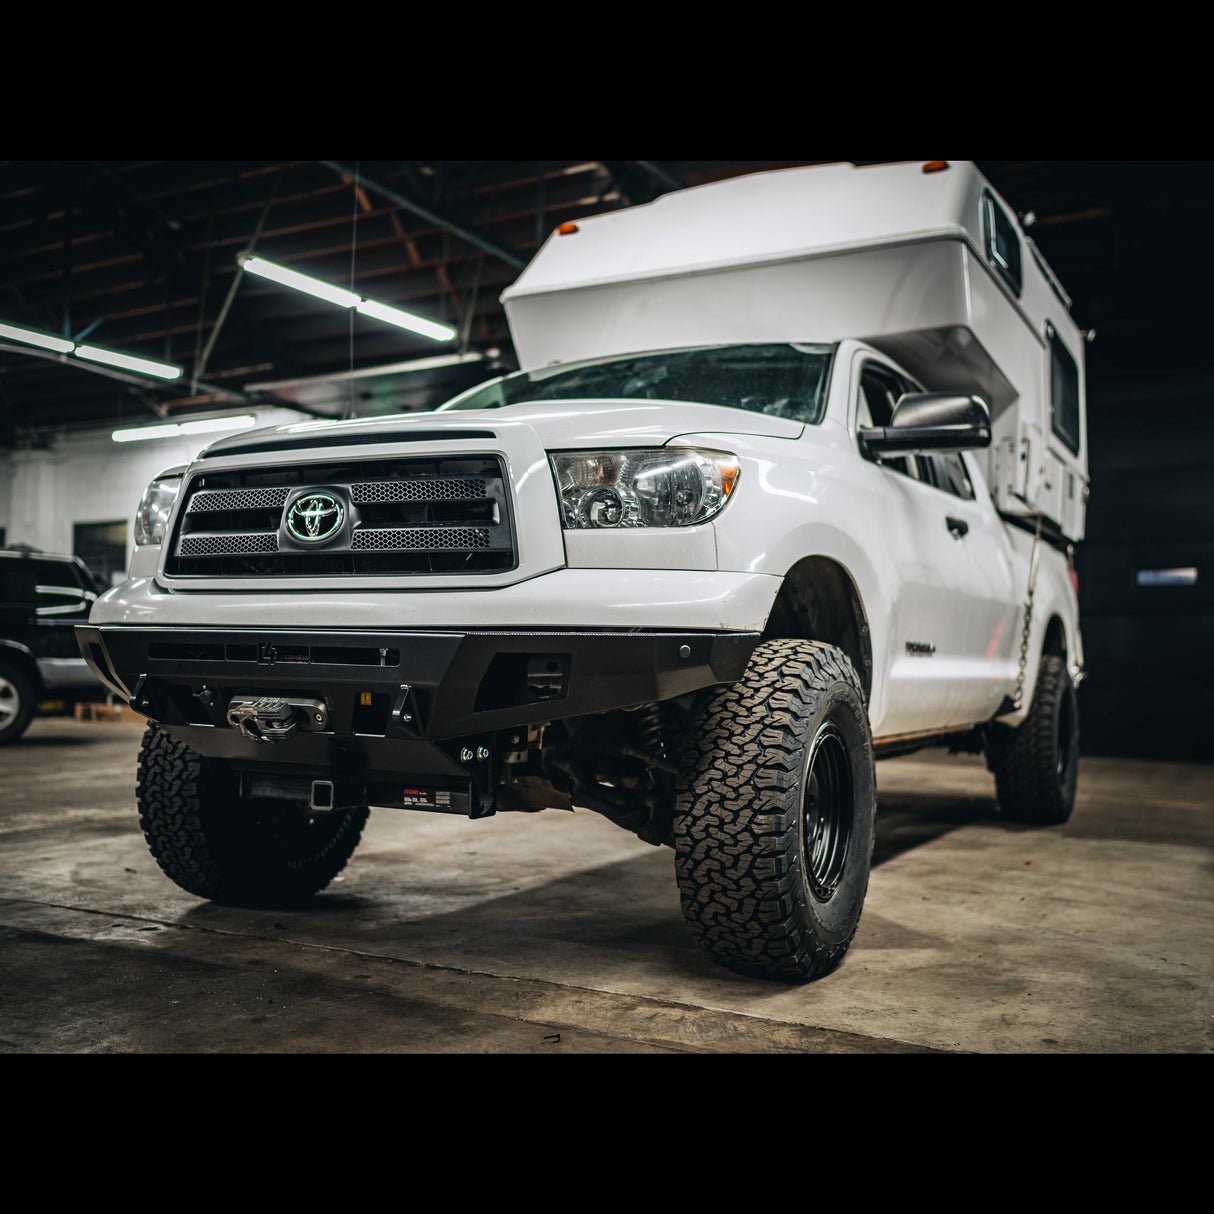 Tundra Overland Series Front Bumper / 2nd Gen / 2007-2013 - Roam Overland Outfitters